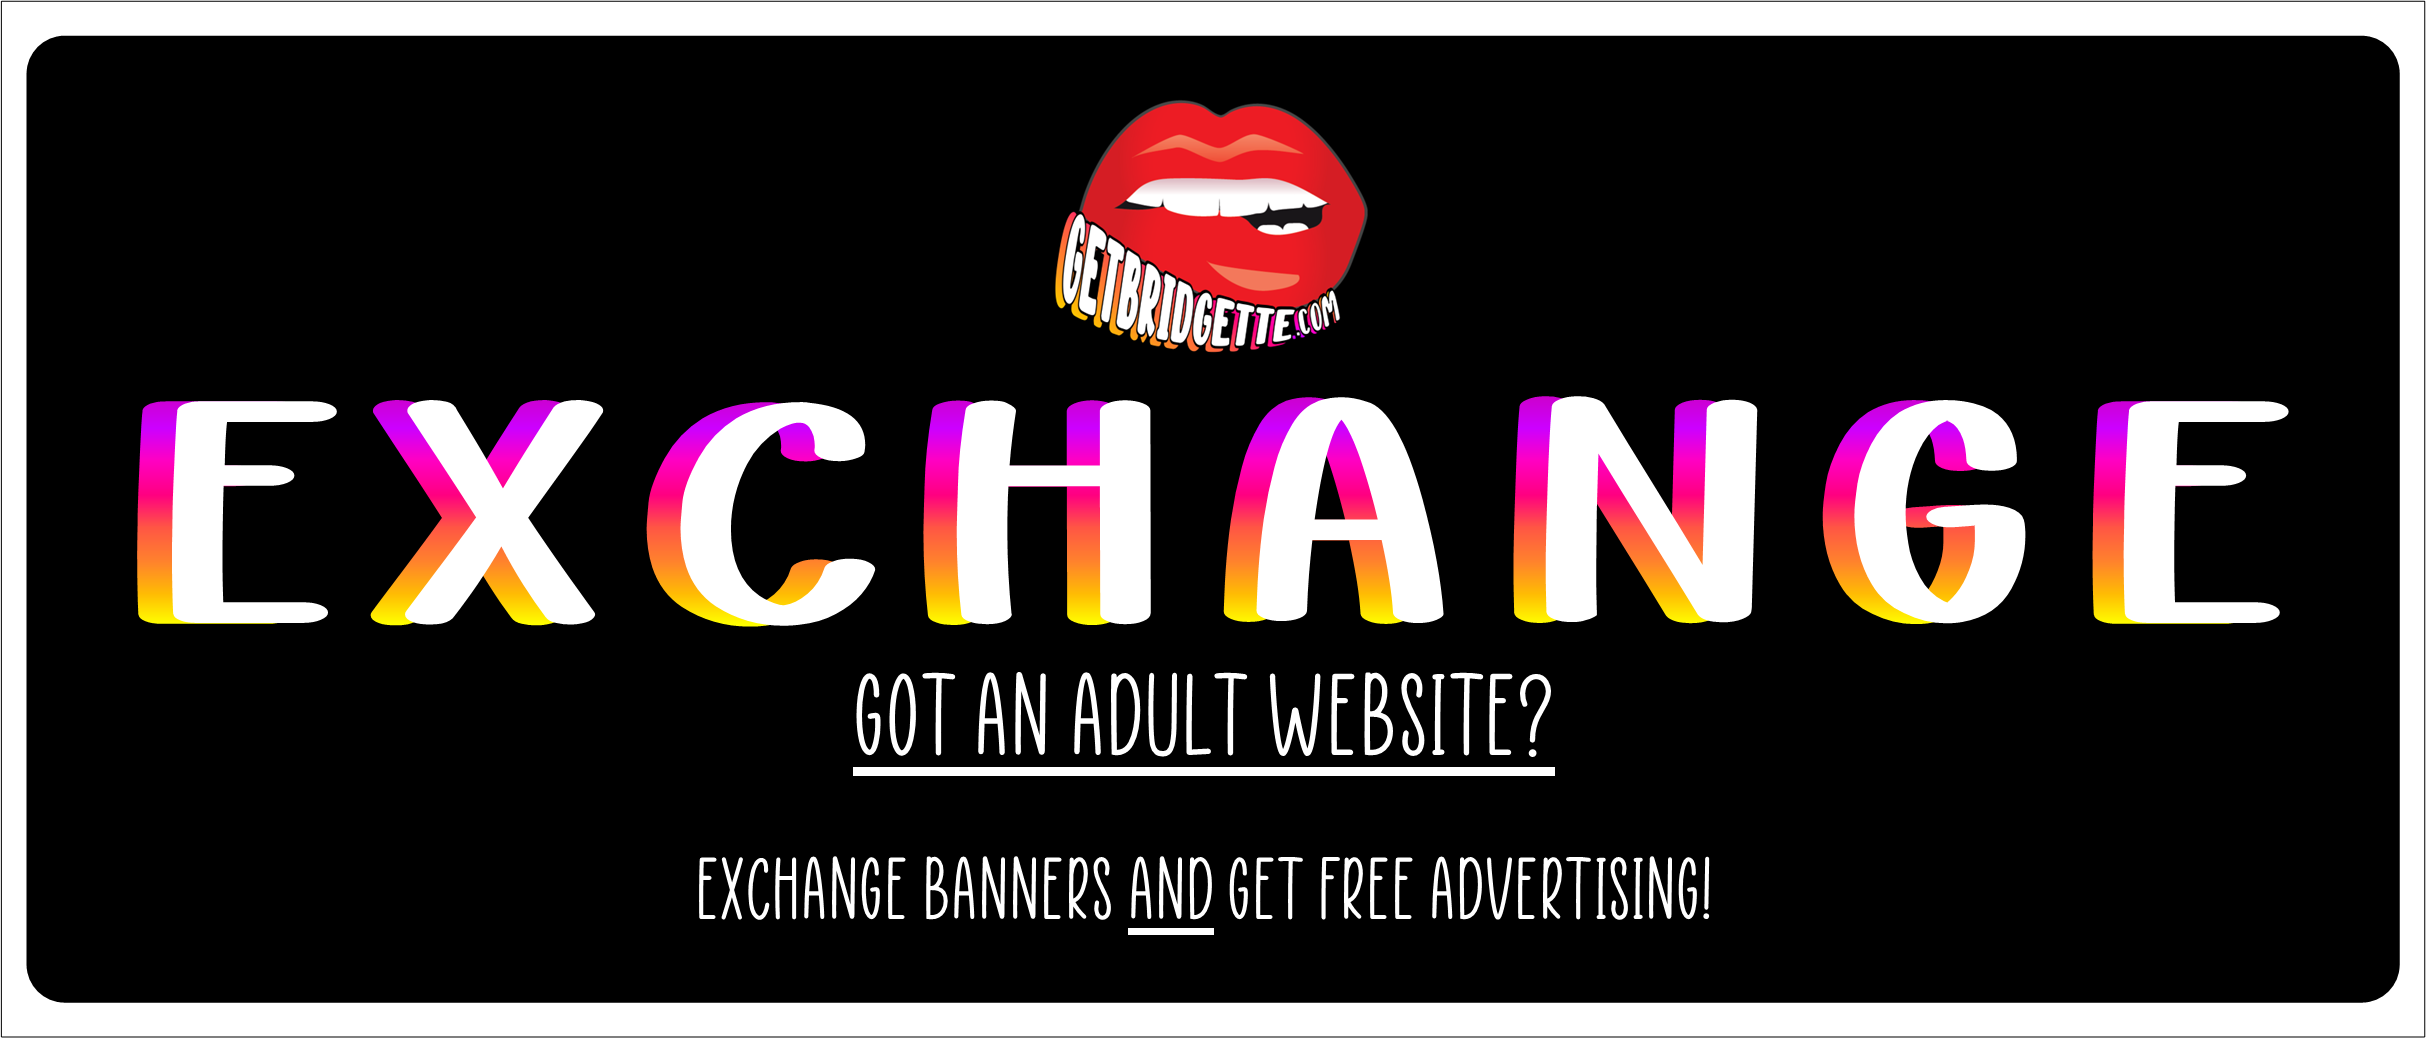 Banner Exchange: Want free advertising? Exchange banners with getBridgette.com!